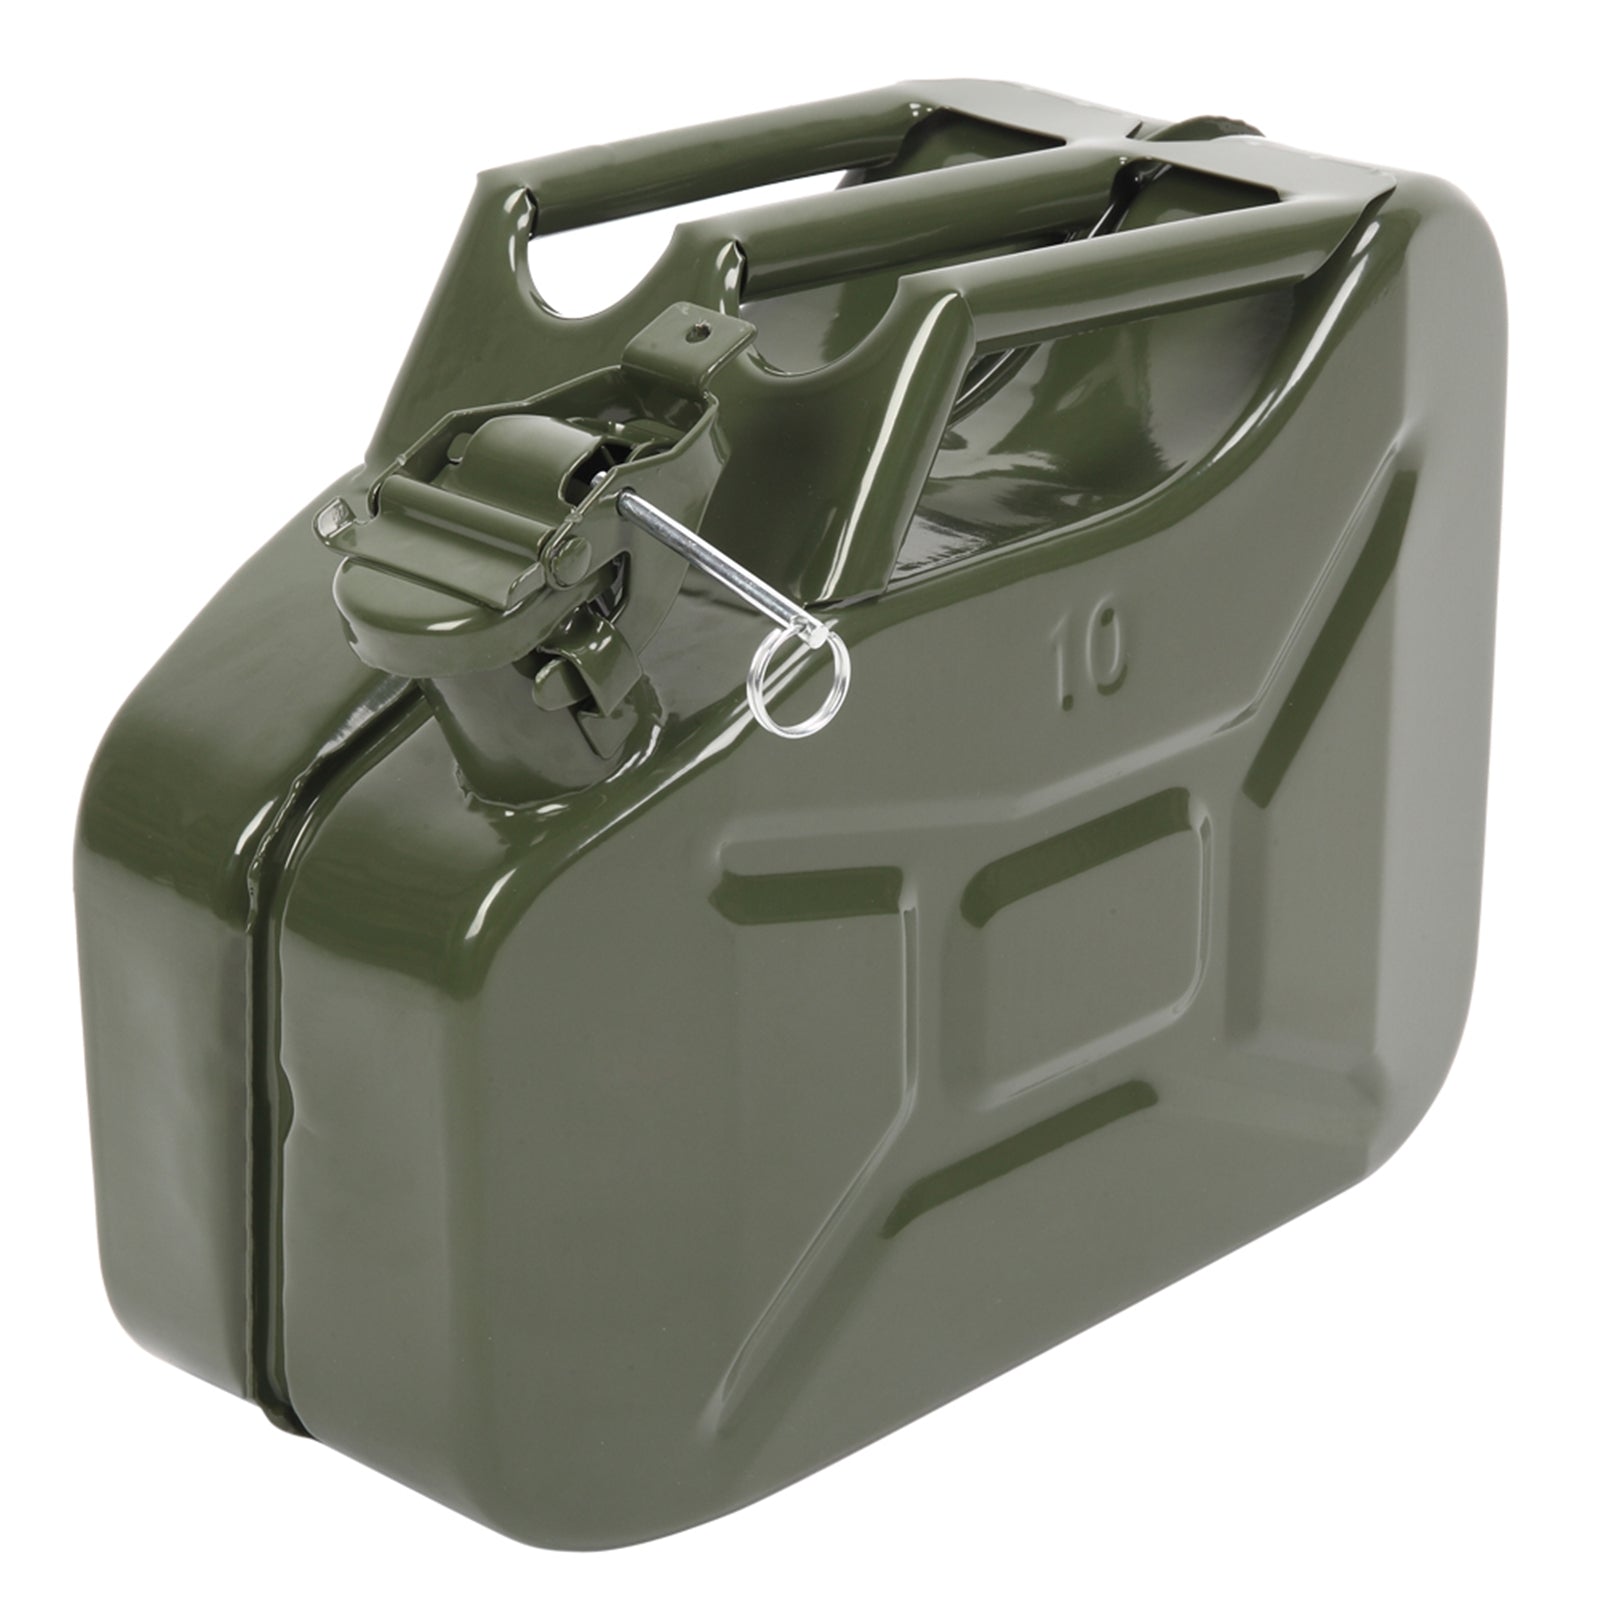 TovaHaus Heavy-Duty Metal Fuel Storage Can - 5, 10, 20L Green Petrol & Diesel Container with Convenient Spout - TovaHaus